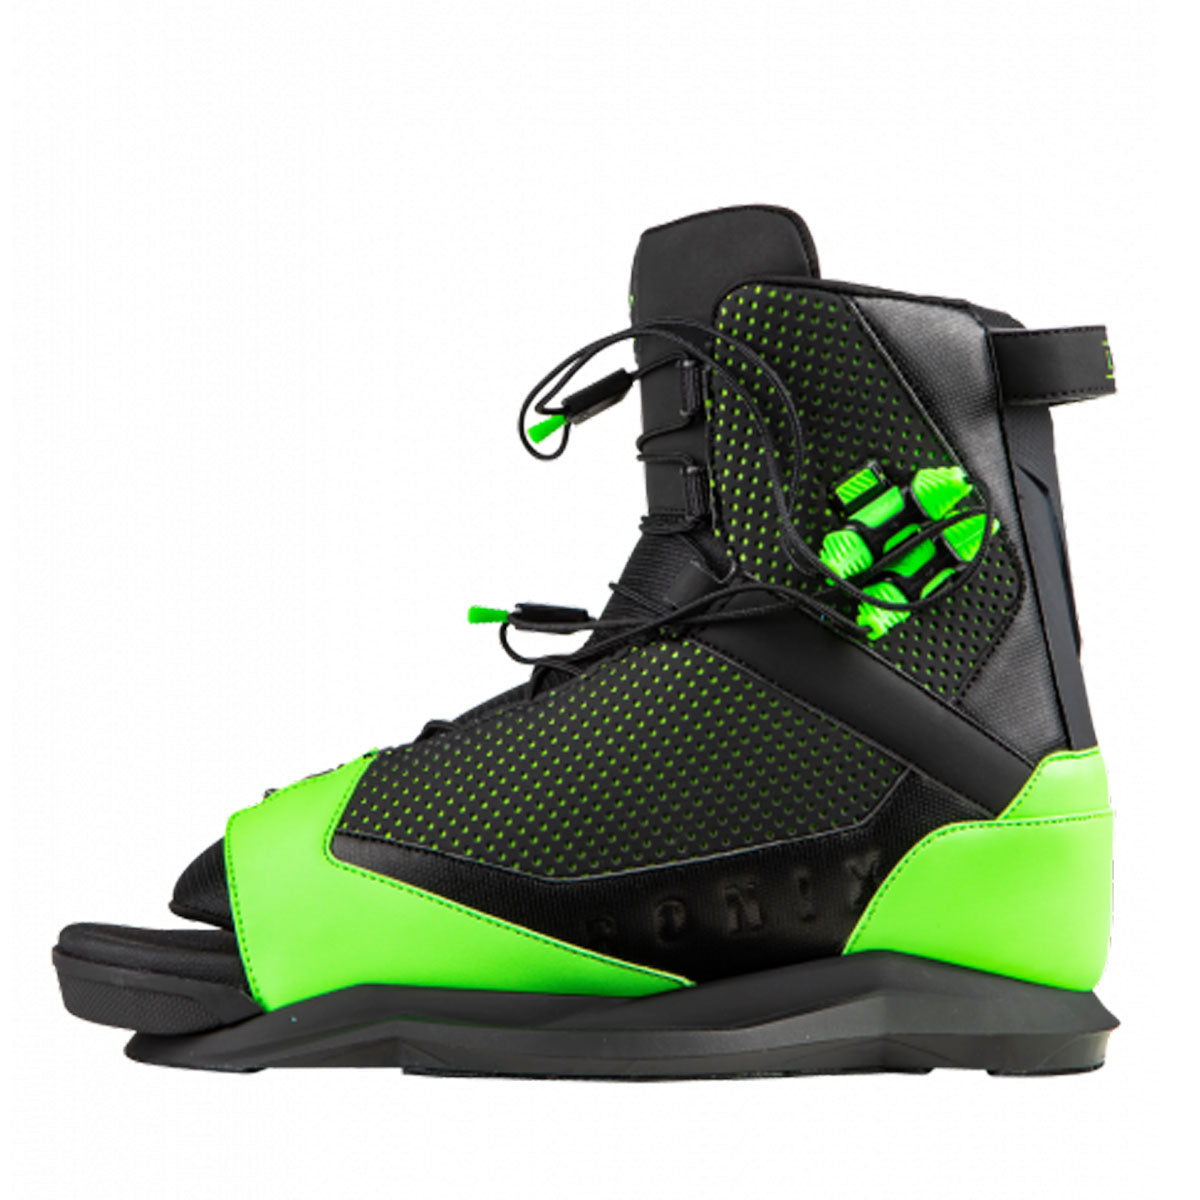 2021 Ronix District Bindings, featuring a customizable fit, in green and black.